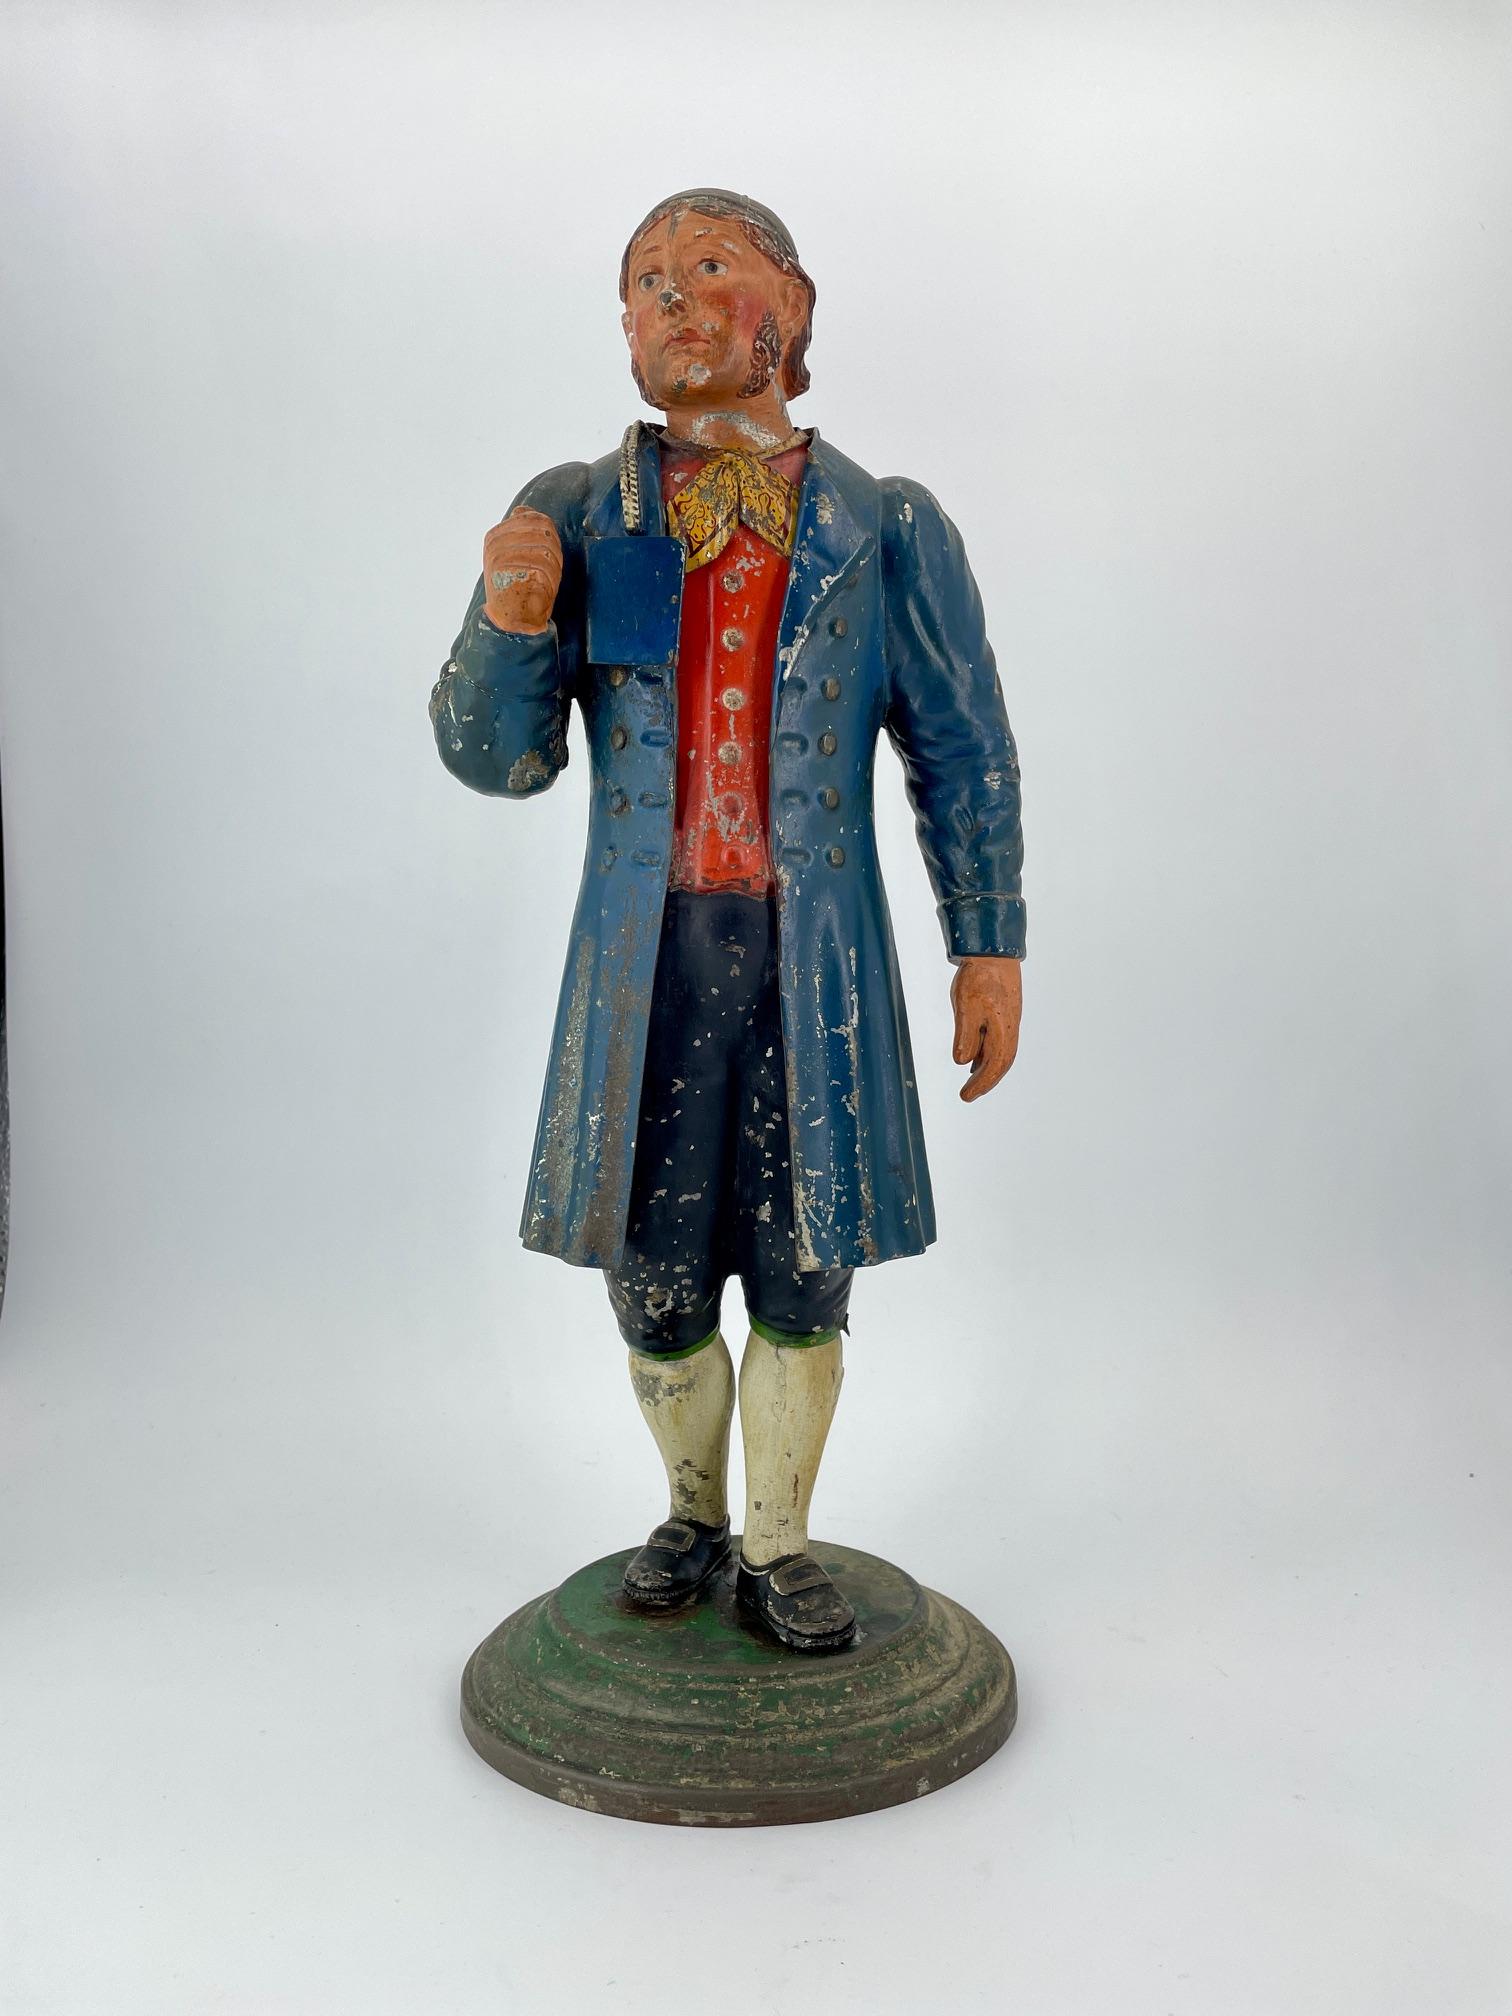 Very rare painted metal figure. Absolutely stunning.   It stands up fine and displays well. 14 inches tall.  German or Italian made.  In poor vintage condition; one foot is completely unattached, stands at an angle leaning forward, in general the